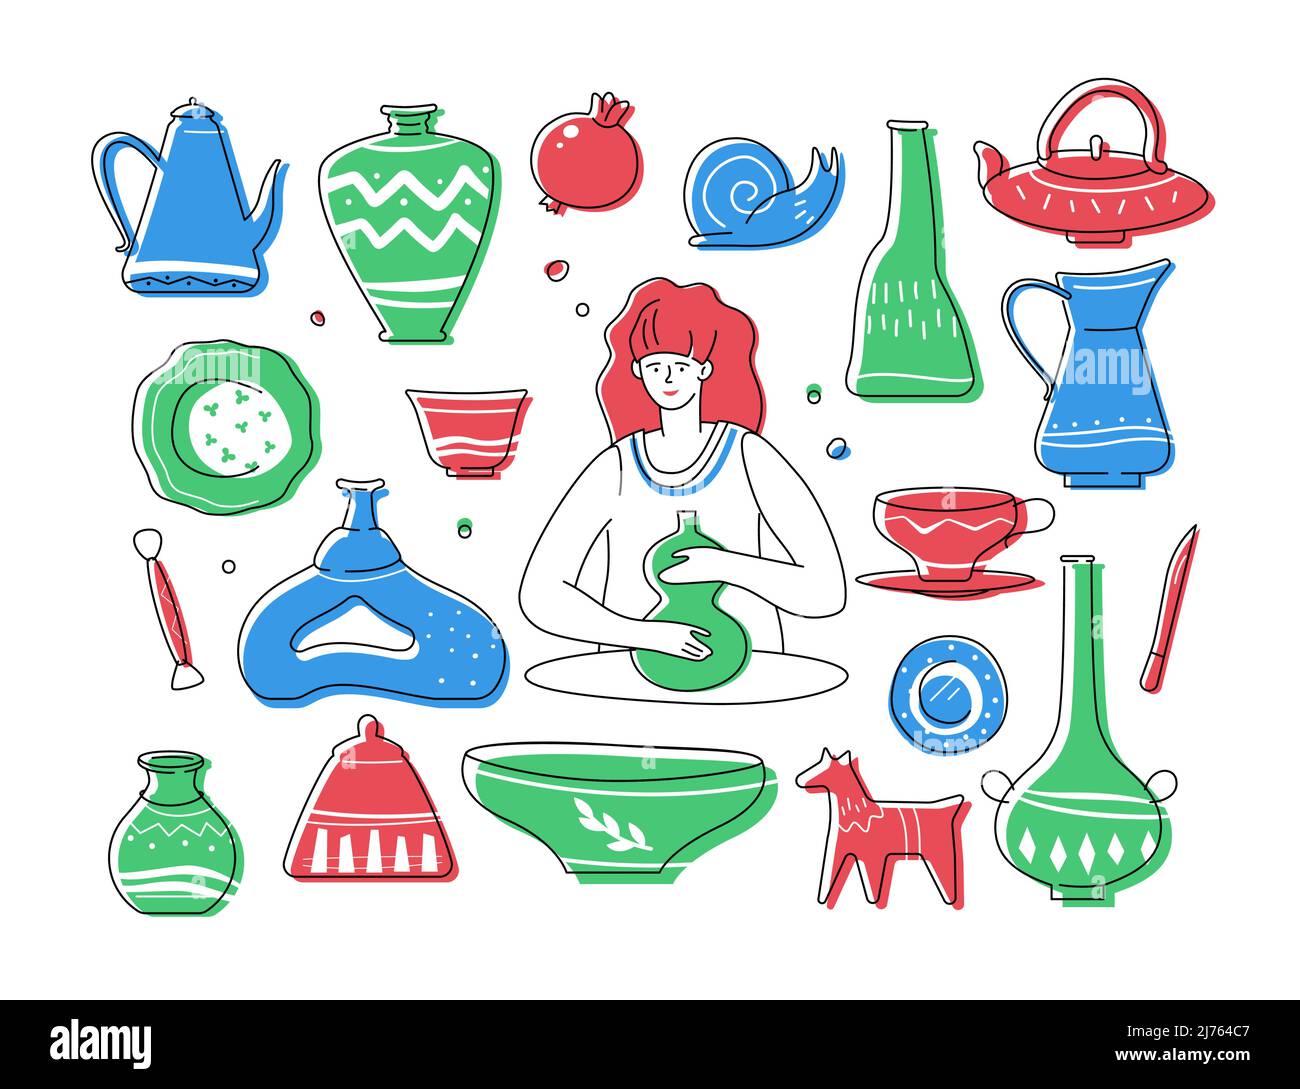 Pottery and hobby - flat design style elements Stock Vector